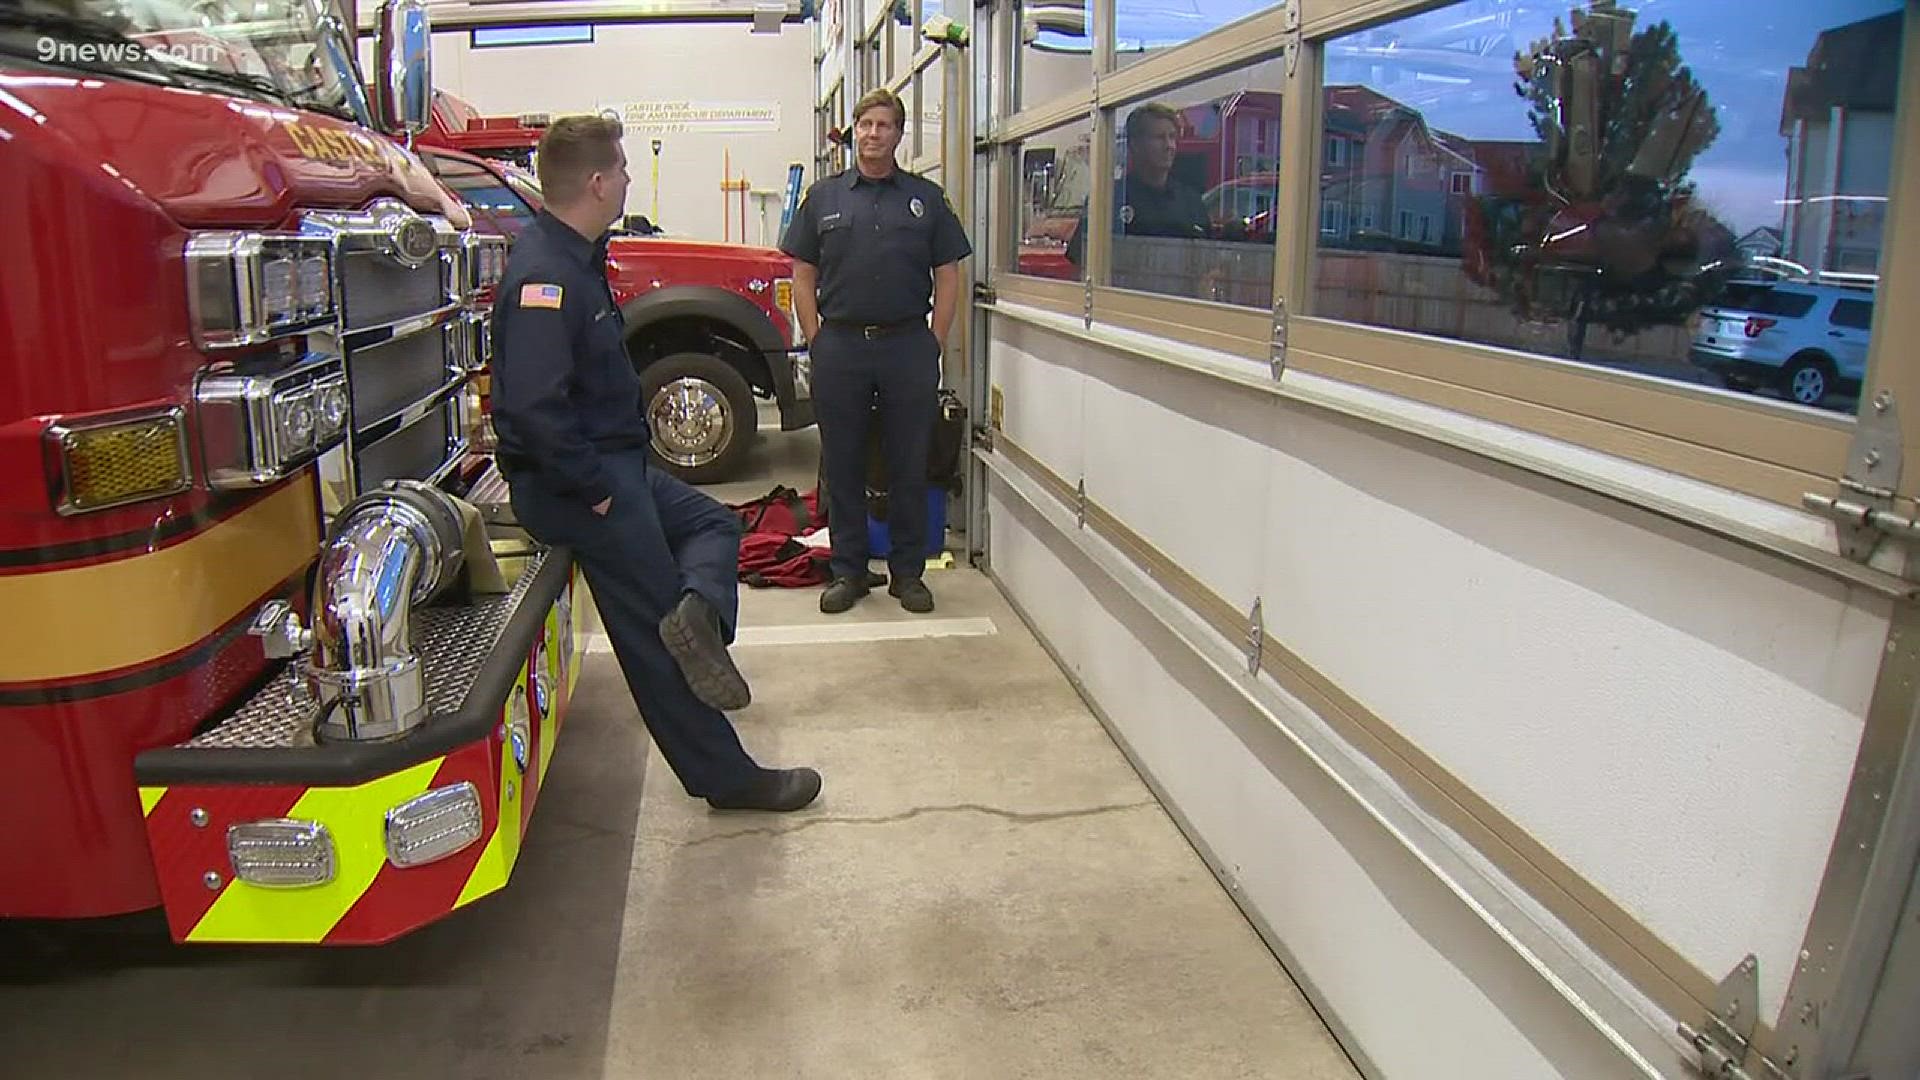 A young man helped save his family using things he learned spending time with Castle Rock firefighters.